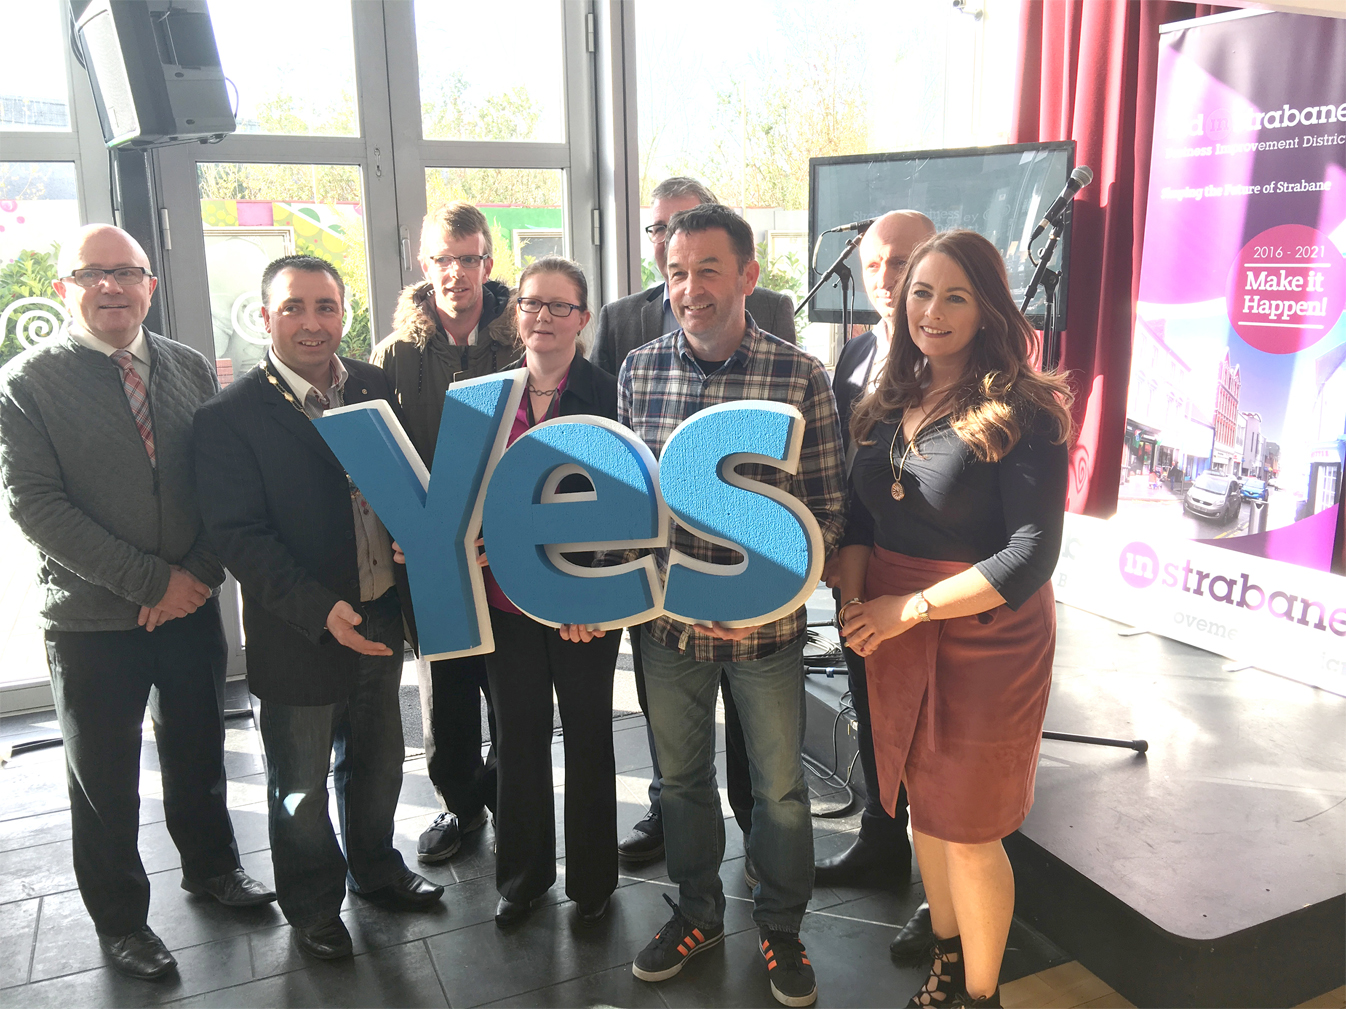 A Yes from Strabane